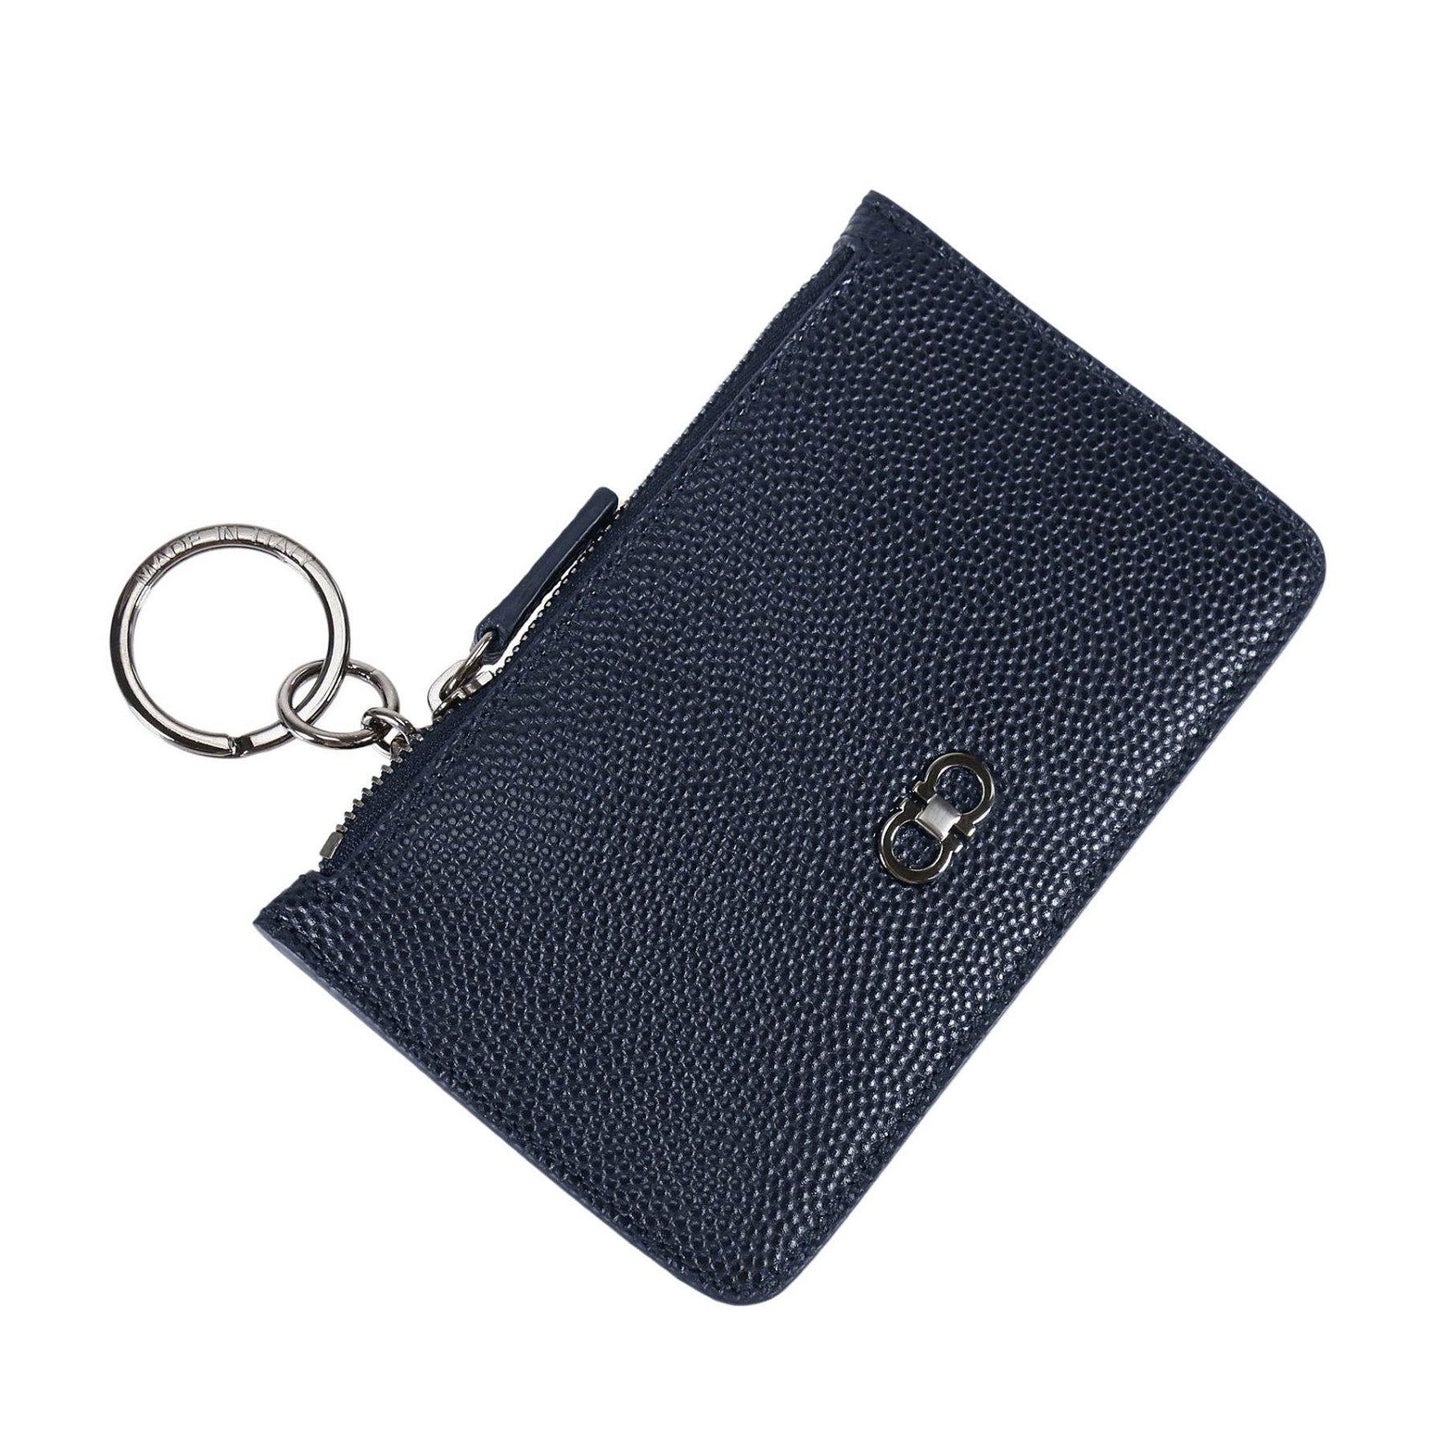 Card Wallet with Key Chain 66 0067 - Cosmos Boutique New Jersey